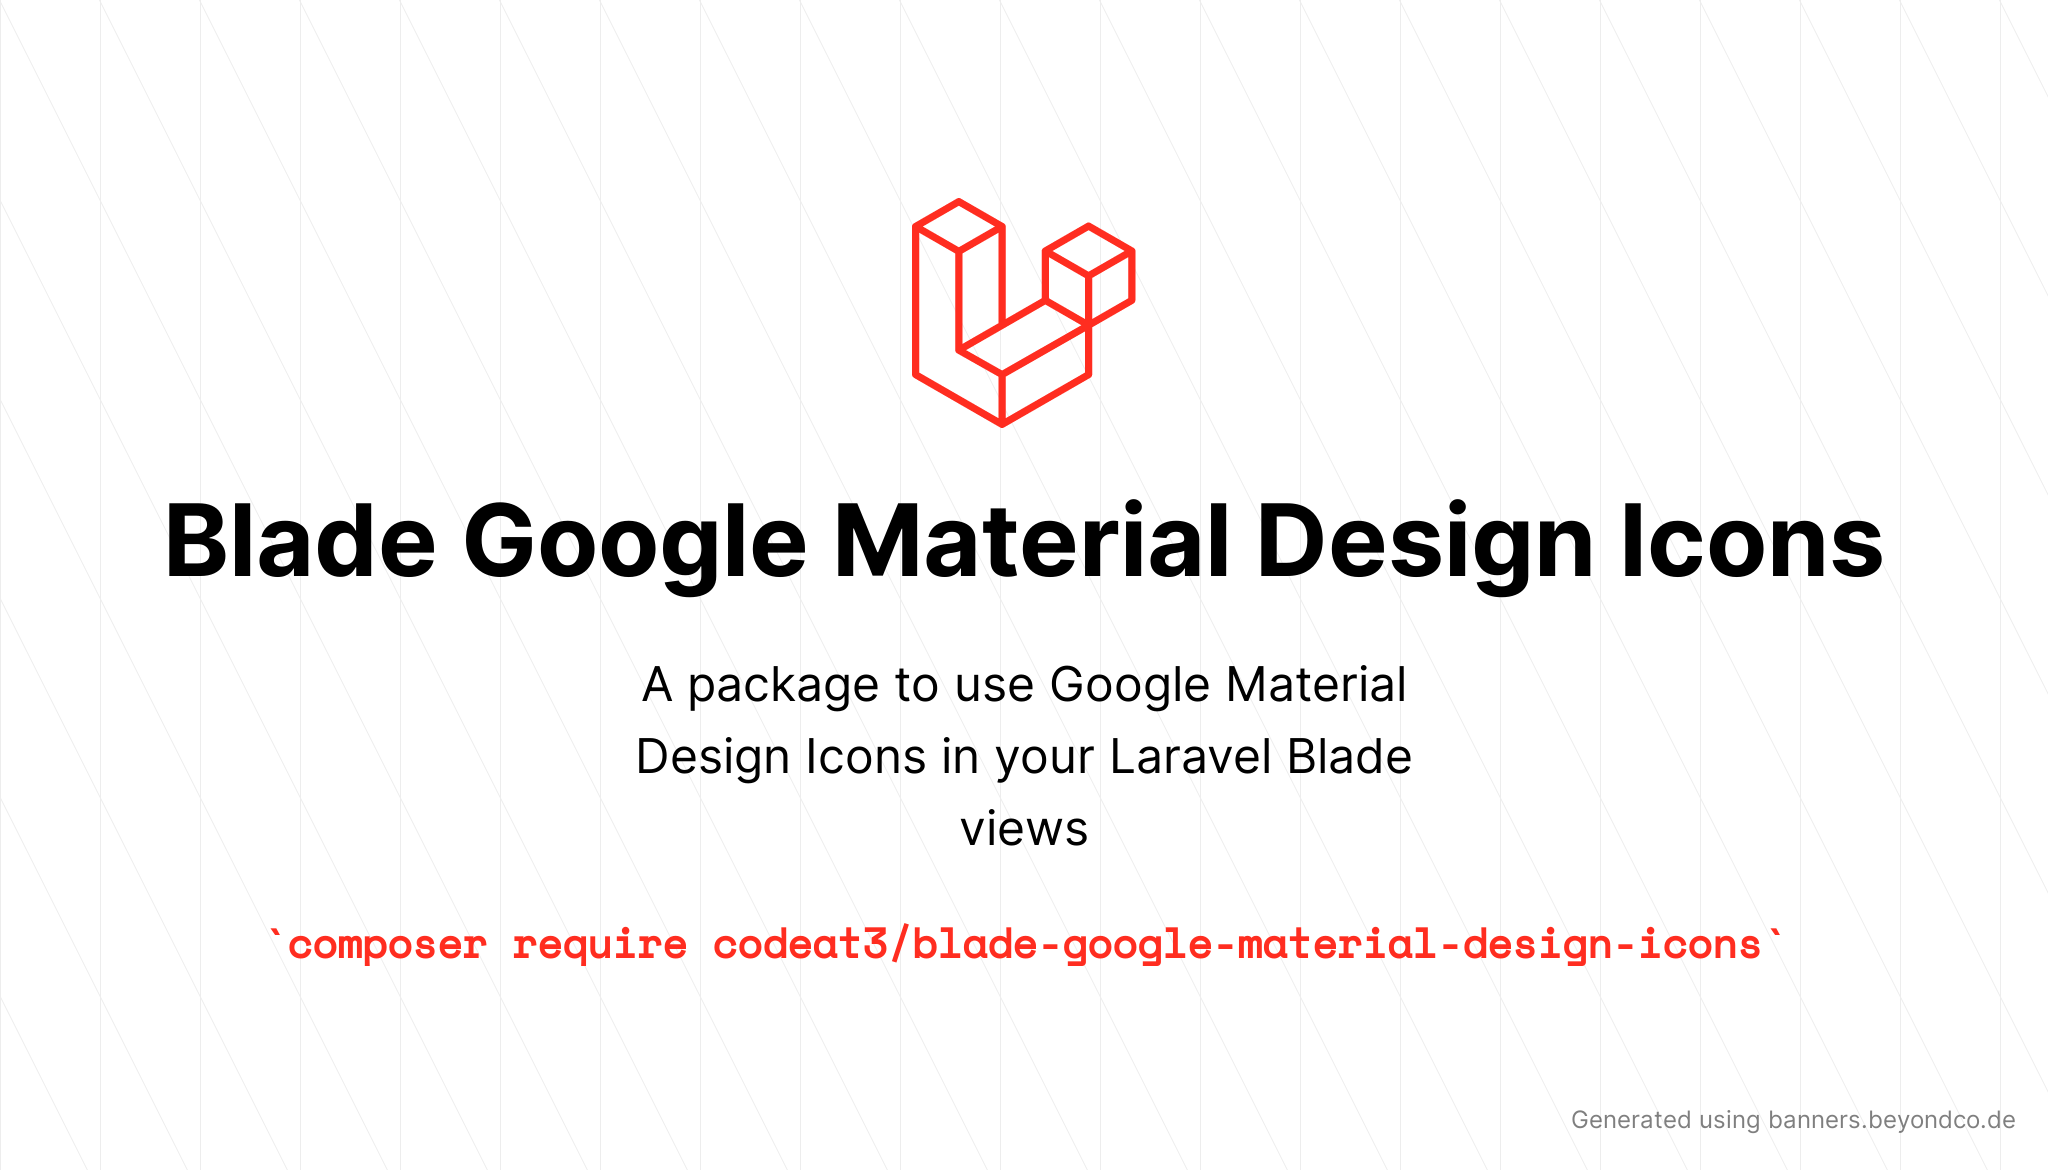 socialcard-blade-google-material-design-icons.png